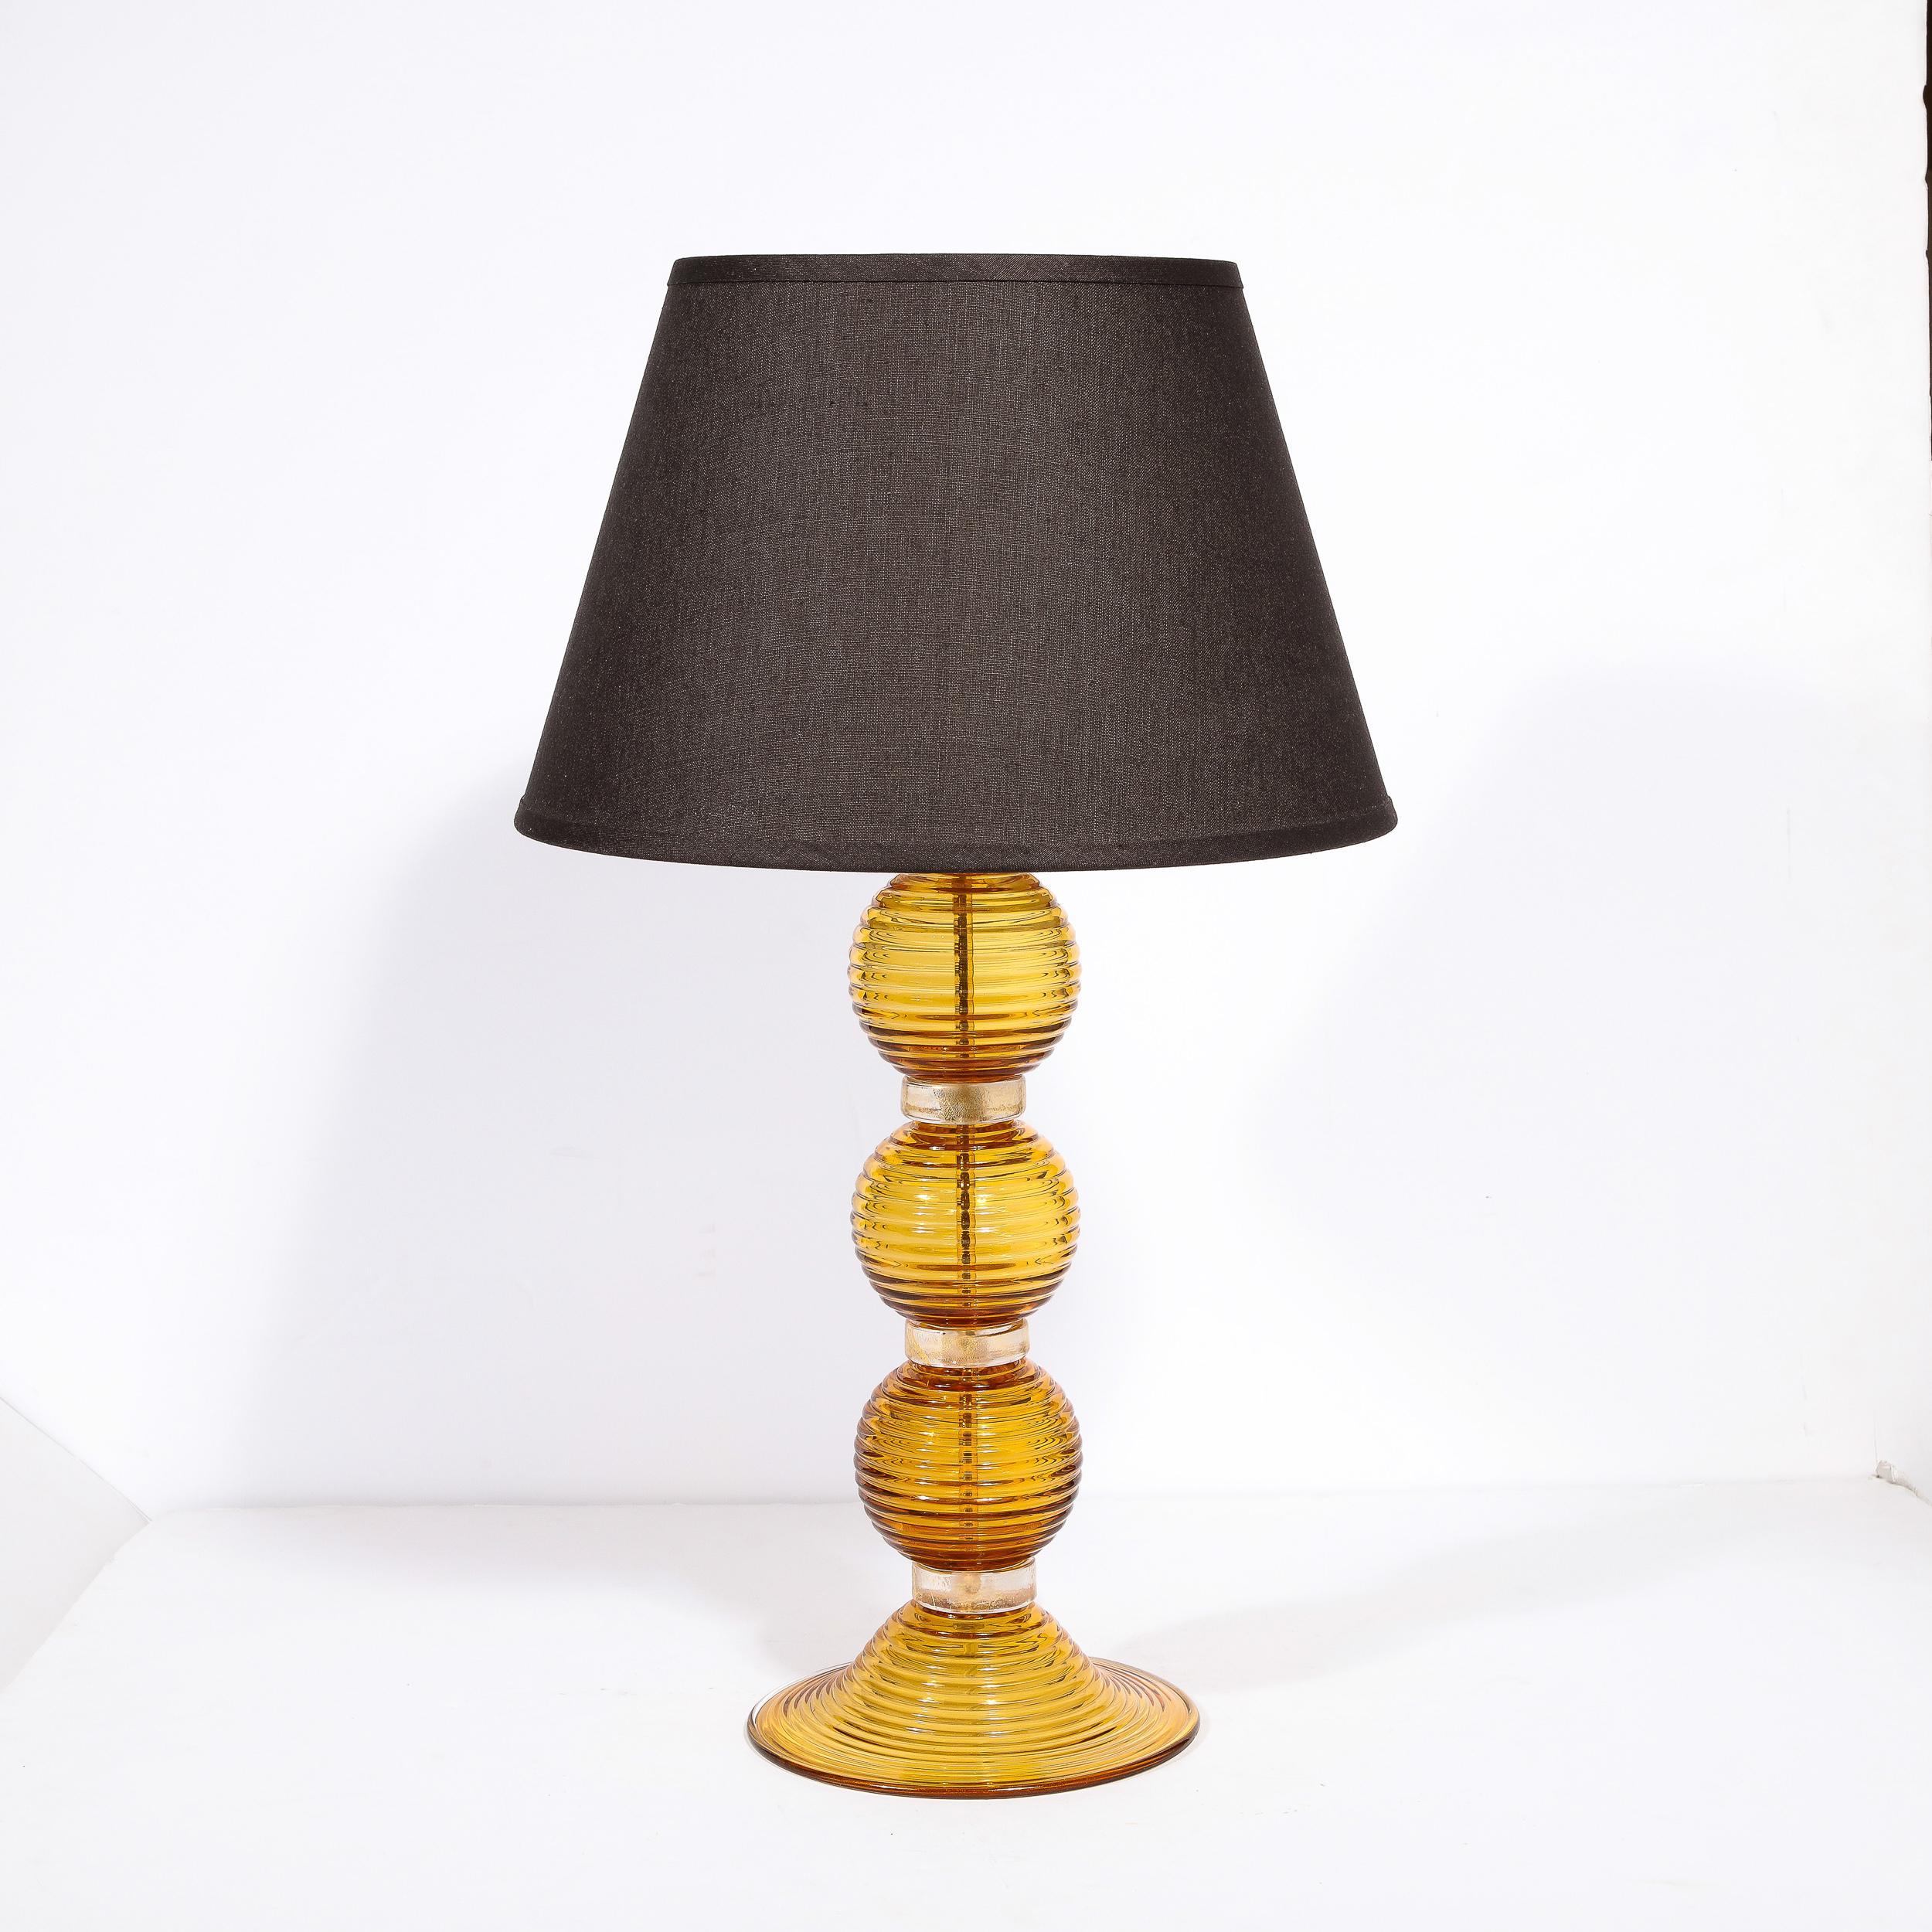 
This refined pair of table lamps were realized in Murano, Italy- the island off the coast of Venice renowned for centuries for its superlative glass production. They feature three orbital forms in a sultry semi translucent amber hued glass with